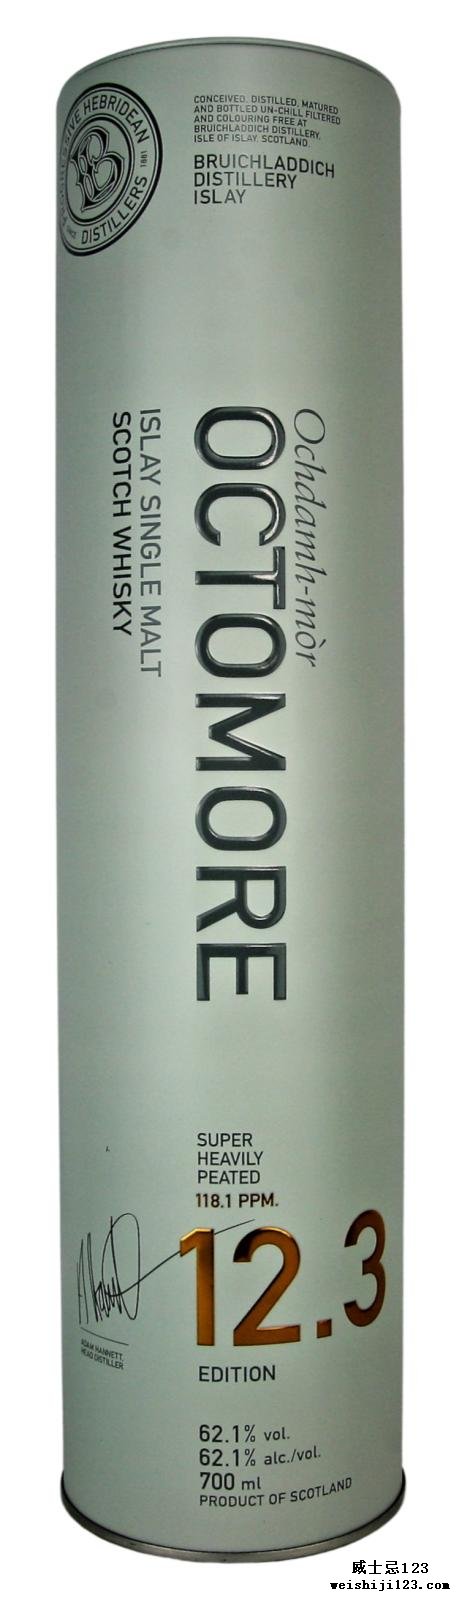 Octomore Edition 12.3 The Impossible Equation / 118.1 PPM